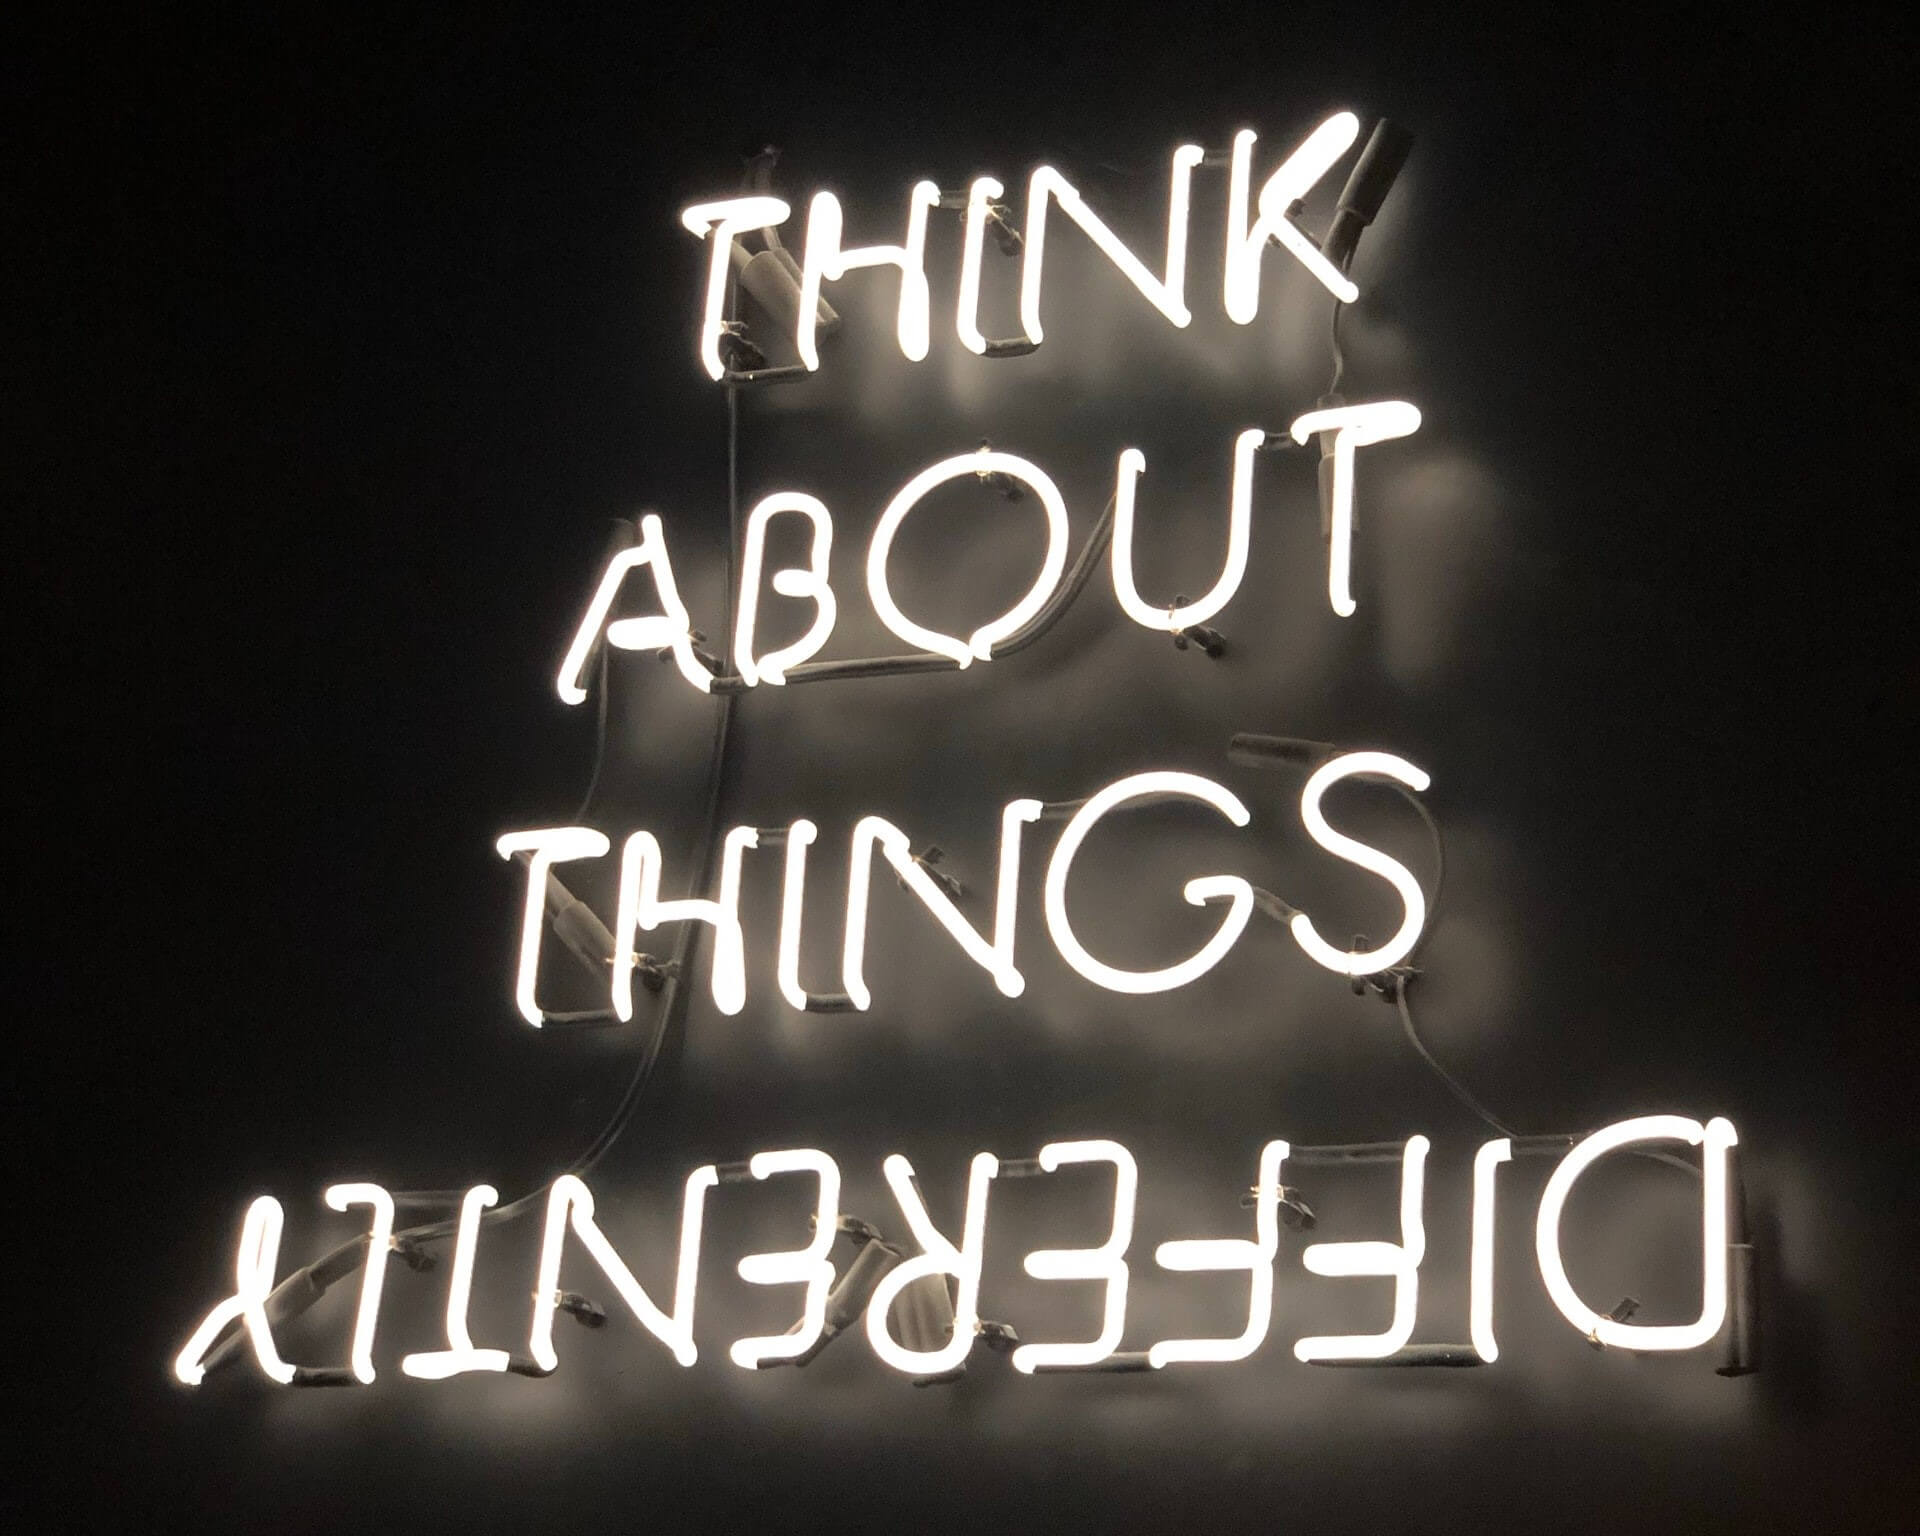 "Think about things differently" neon sign